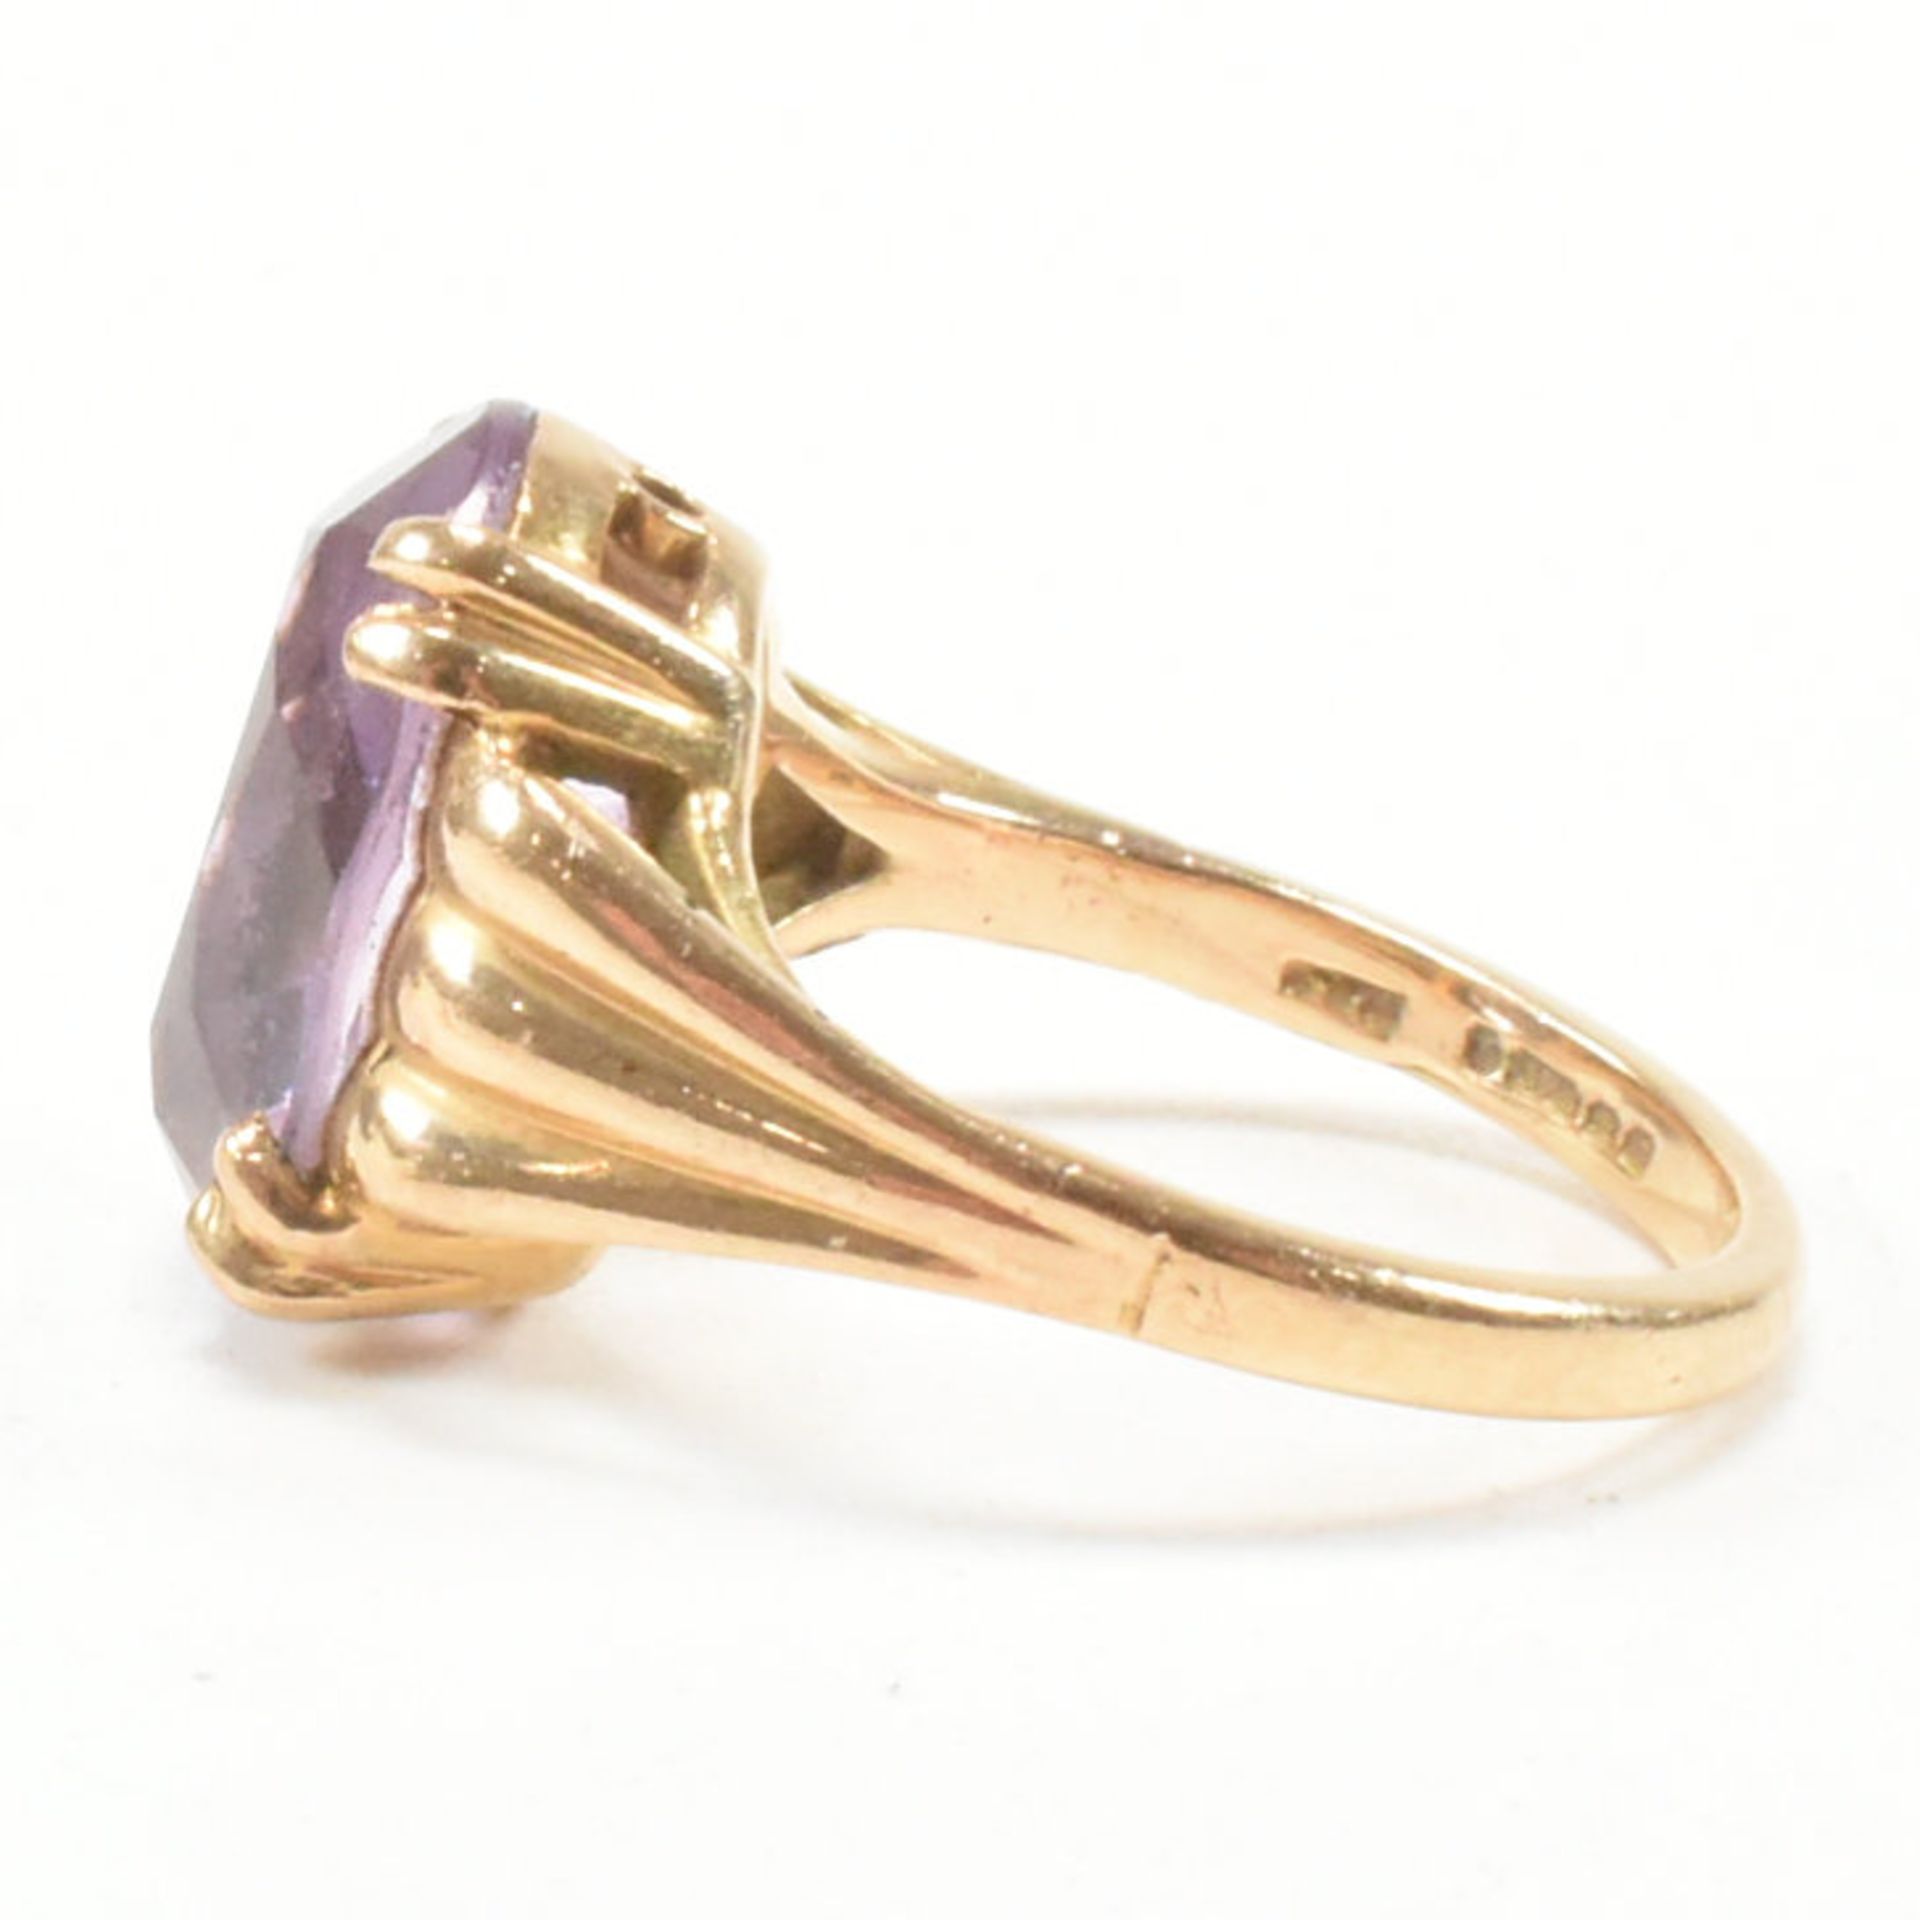 VINTAGE HALLMARKED 9CT GOLD & AMETHYST SOLITAIRE RING - Image 4 of 9